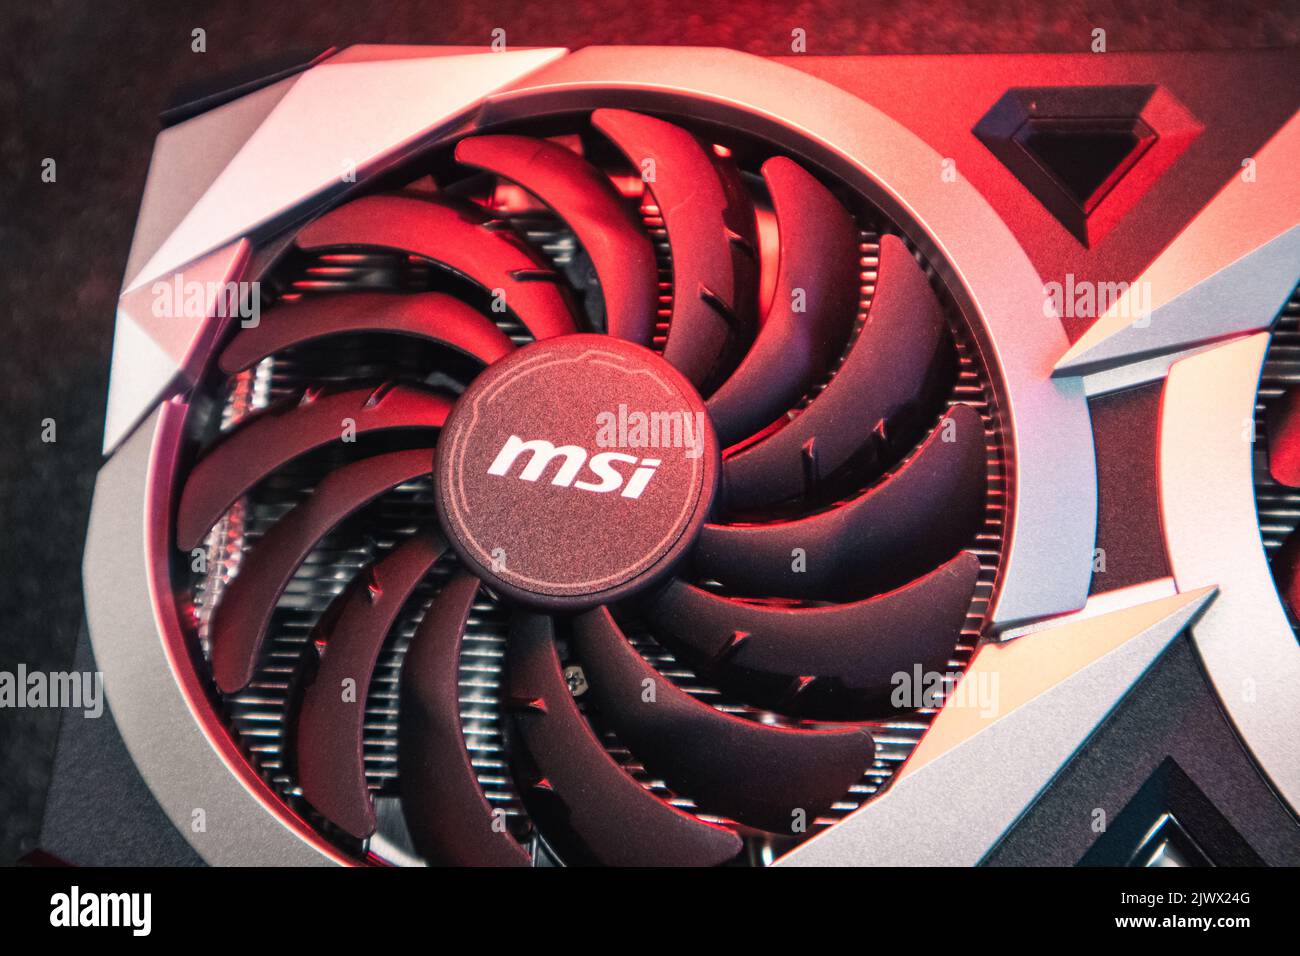 Kyiv, Ukraine - August 19, 2022: Cooler in red light, MSI graphics card  with AMD Radeon RX6700XT chipset, close-up with selective focus, PC  equipment Stock Photo - Alamy